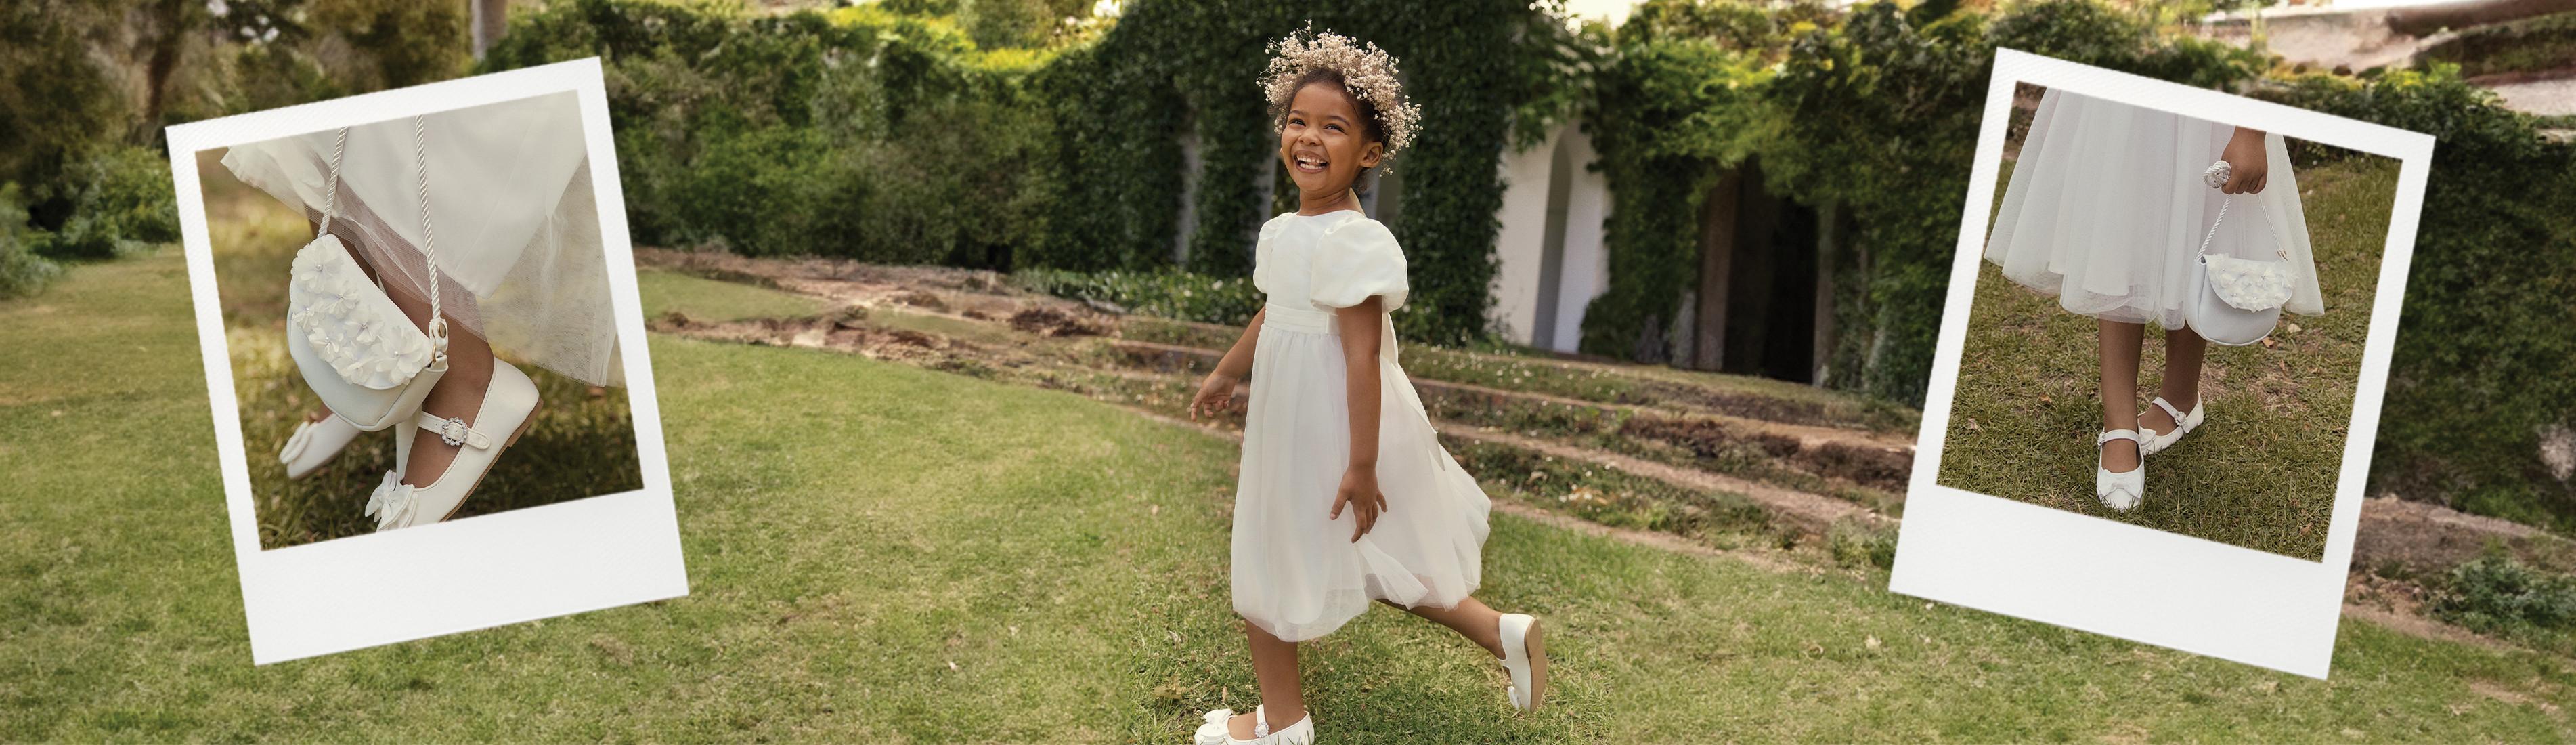 Child in white dress and shoes